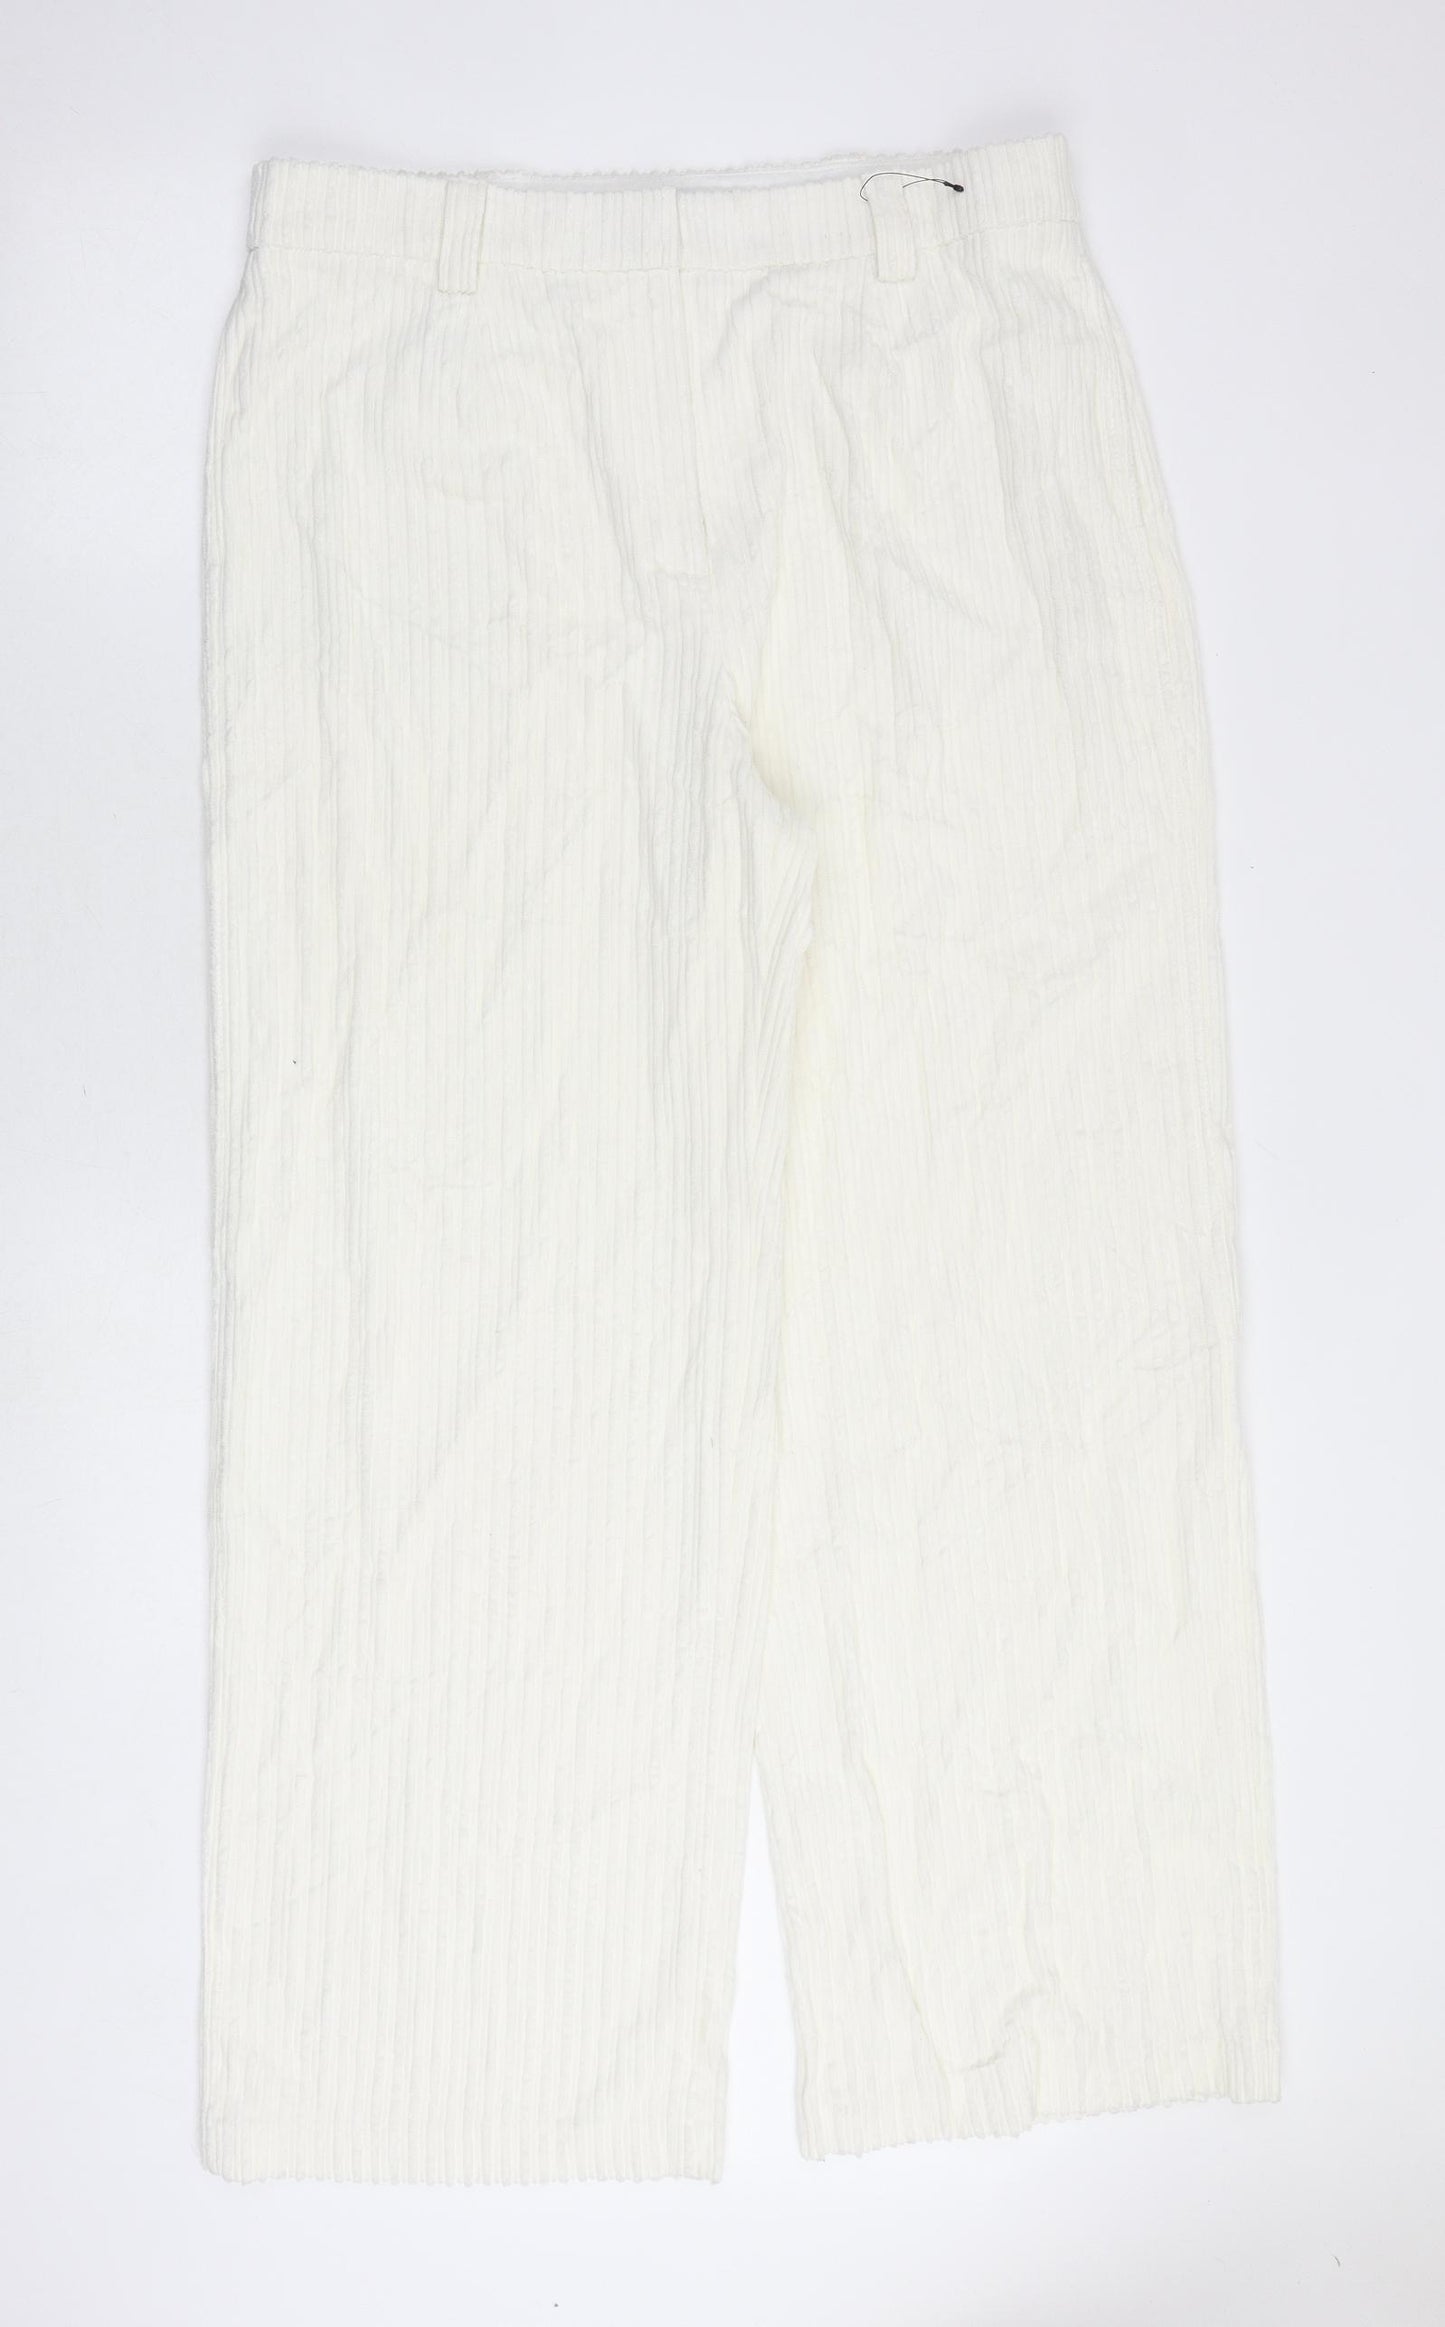 Marks and Spencer Womens Ivory Cotton Trousers Size 18 Regular Zip